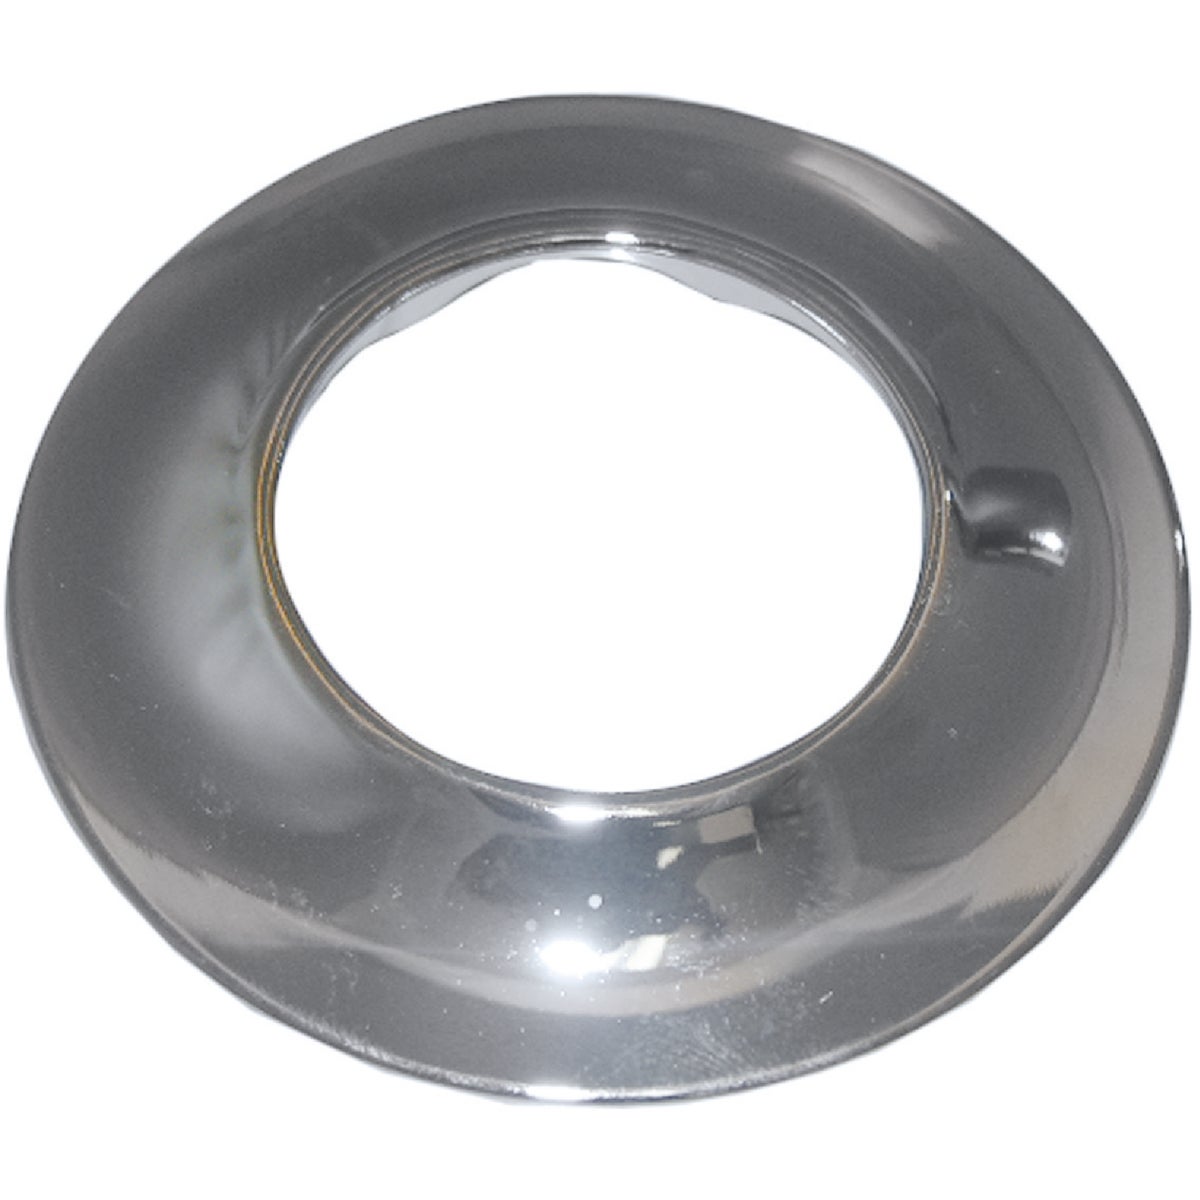 Lasco 1-1/4 In. IP Chrome Plated Flange